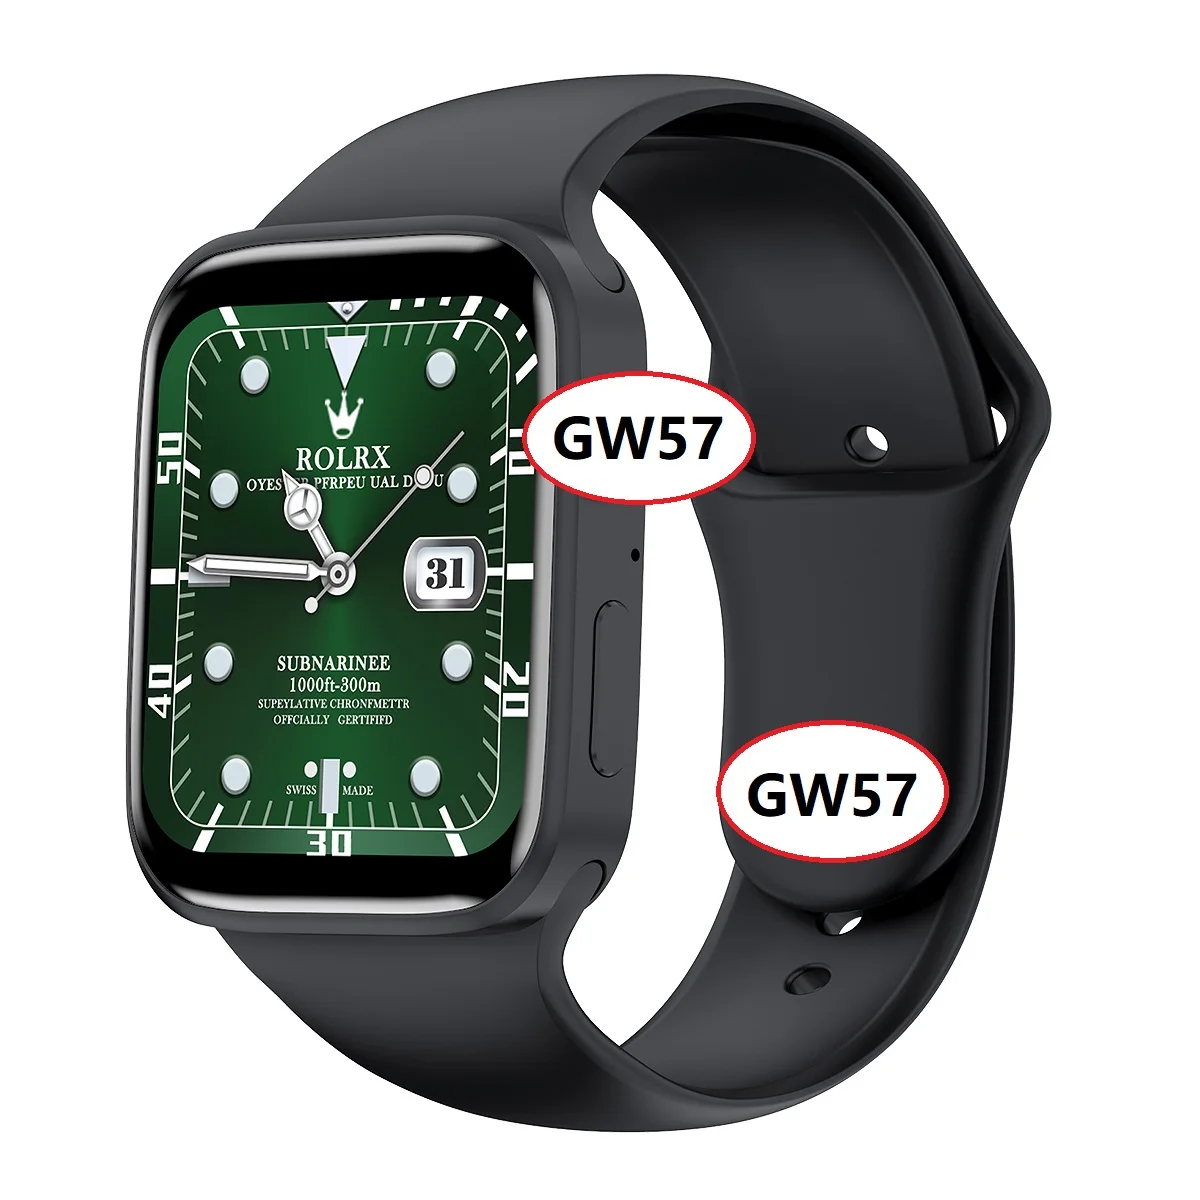 

GW57 Smart Watches New Arrivals BT Call IP67 Waterproof ECG Heart Rate Monitor GW57 Series 6 7 Android Smart Watch Z36 io 2021, Black, silver, blue, pink,purple ,green